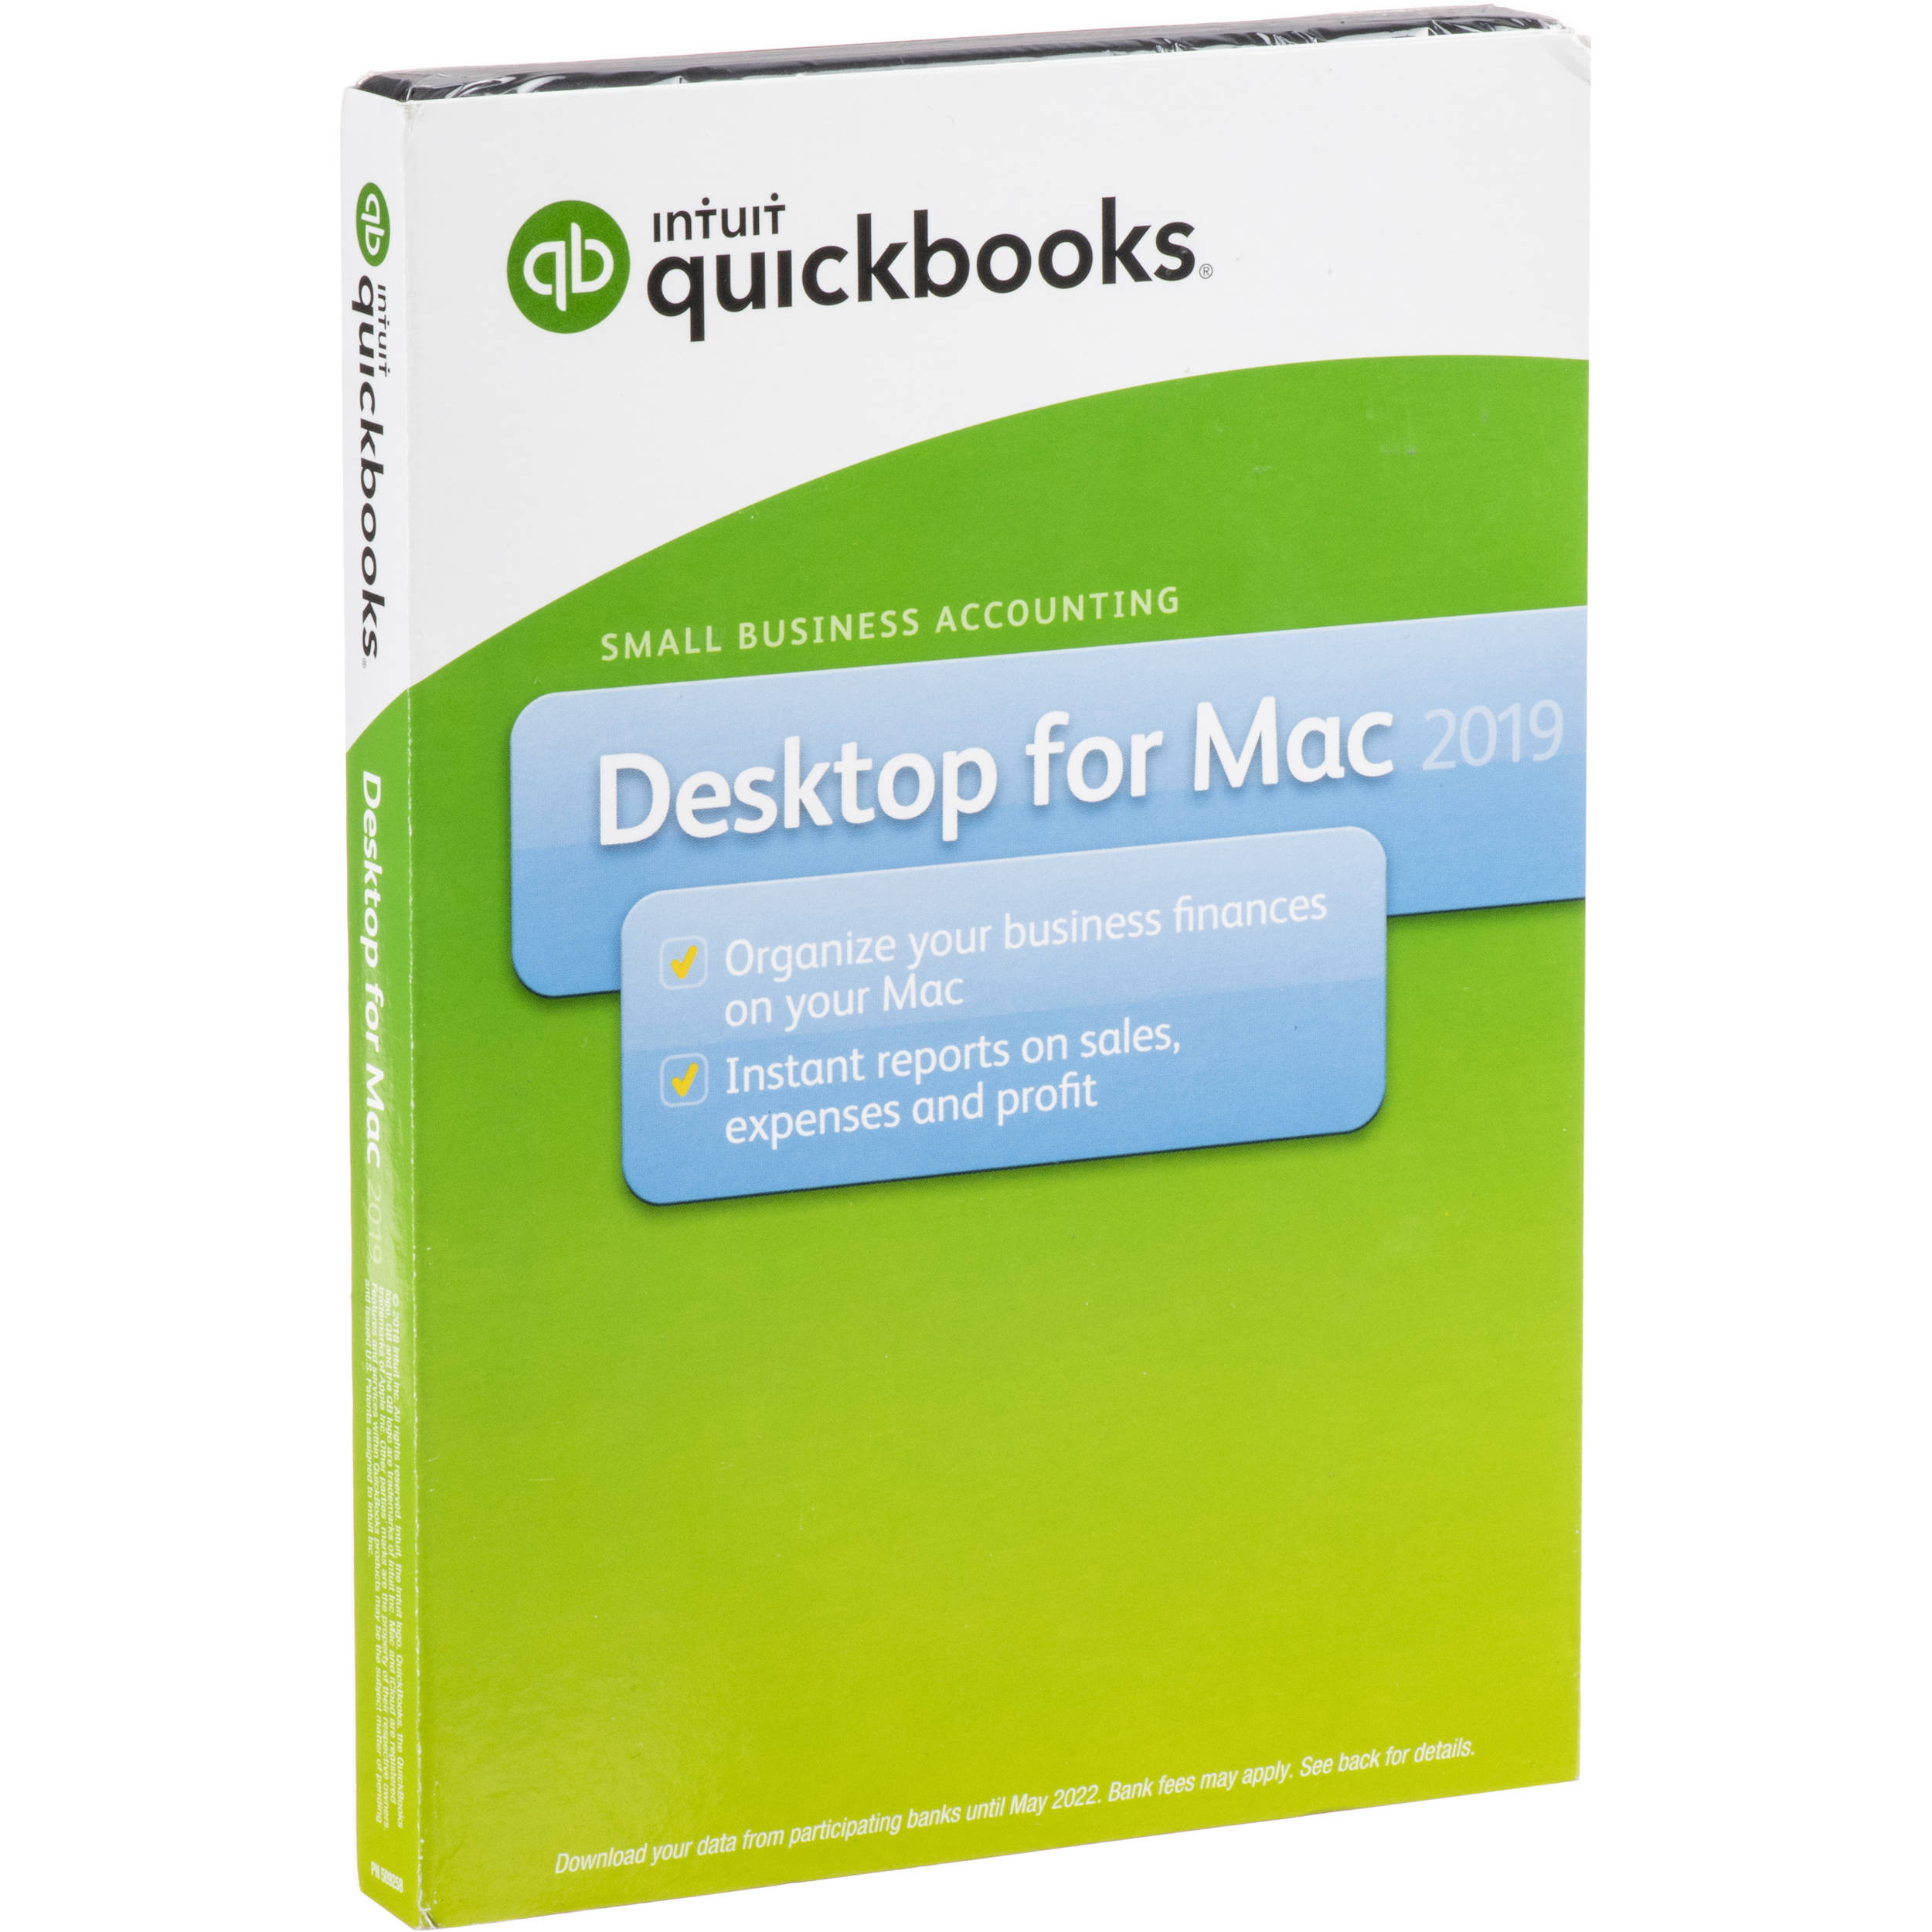 does intuit make quickbooks for mac